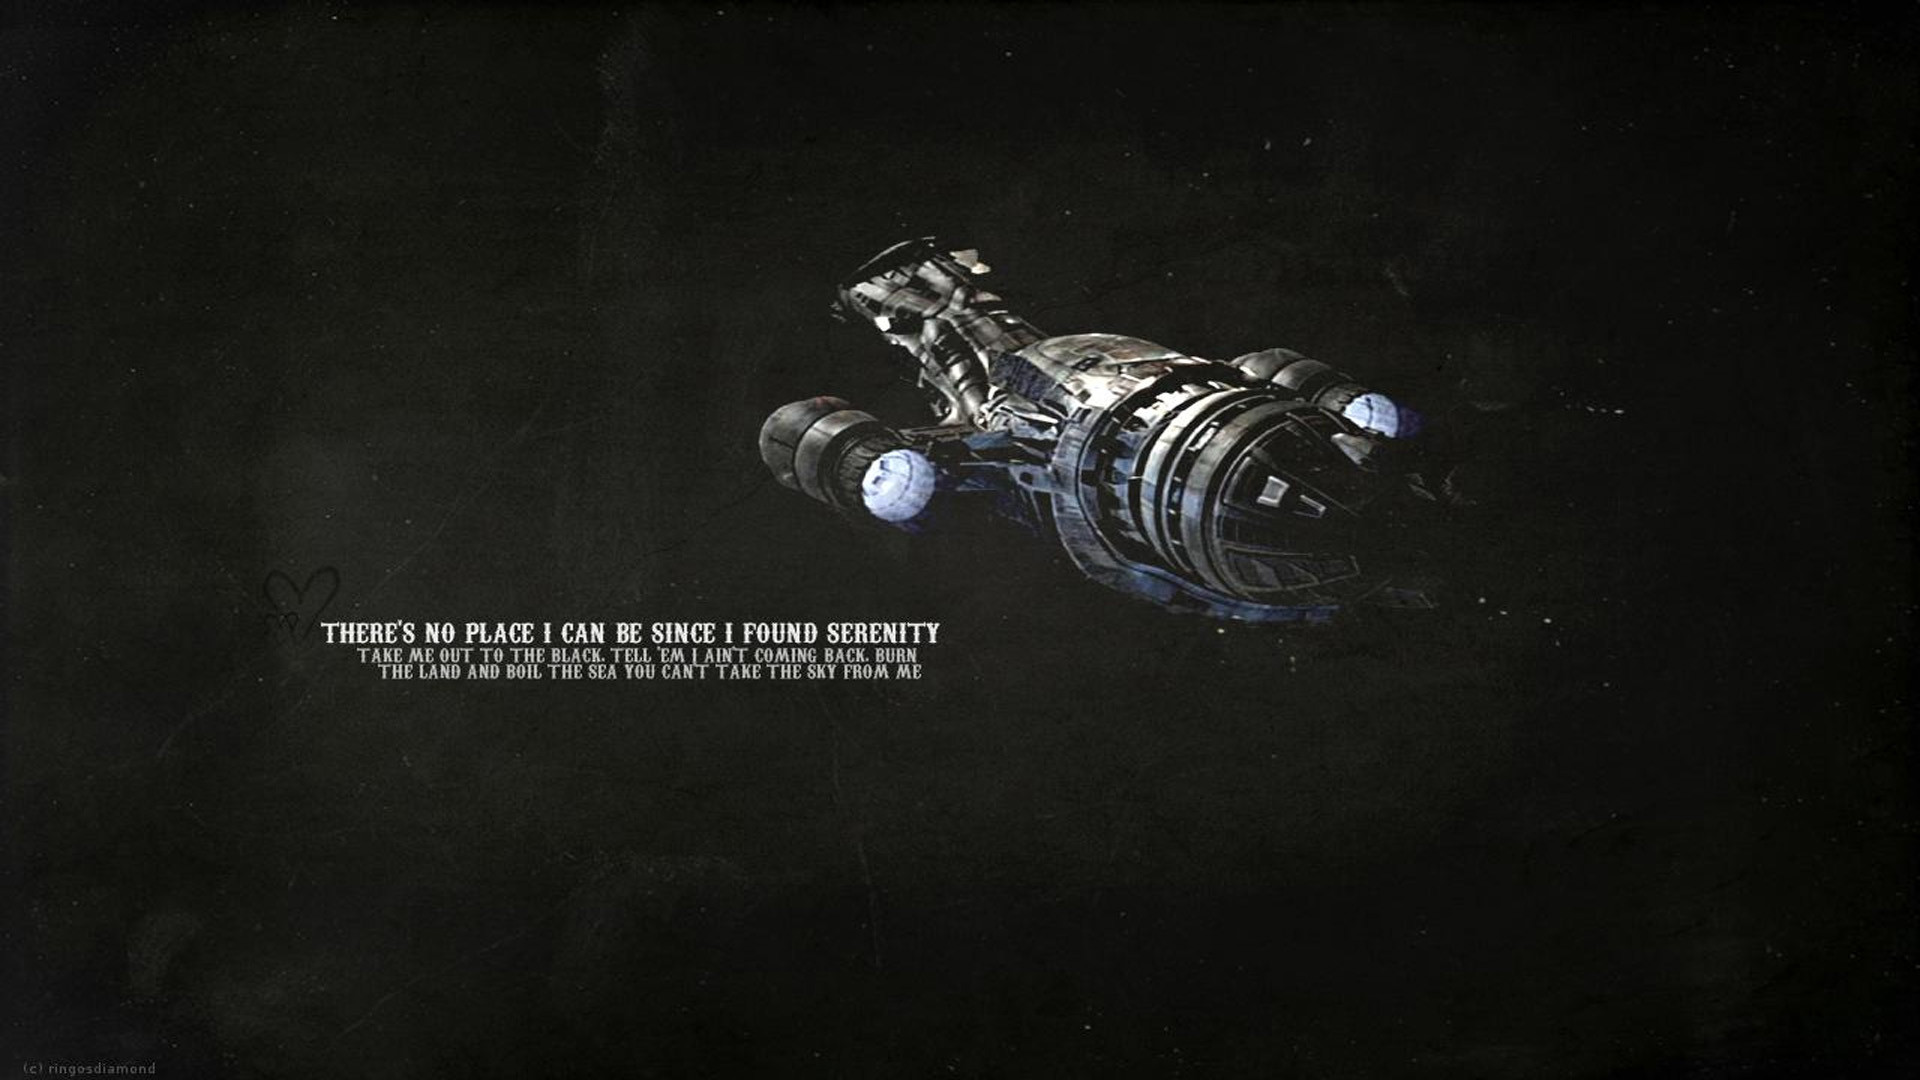 firefly wallpaper,darkness,font,space,photography,vehicle